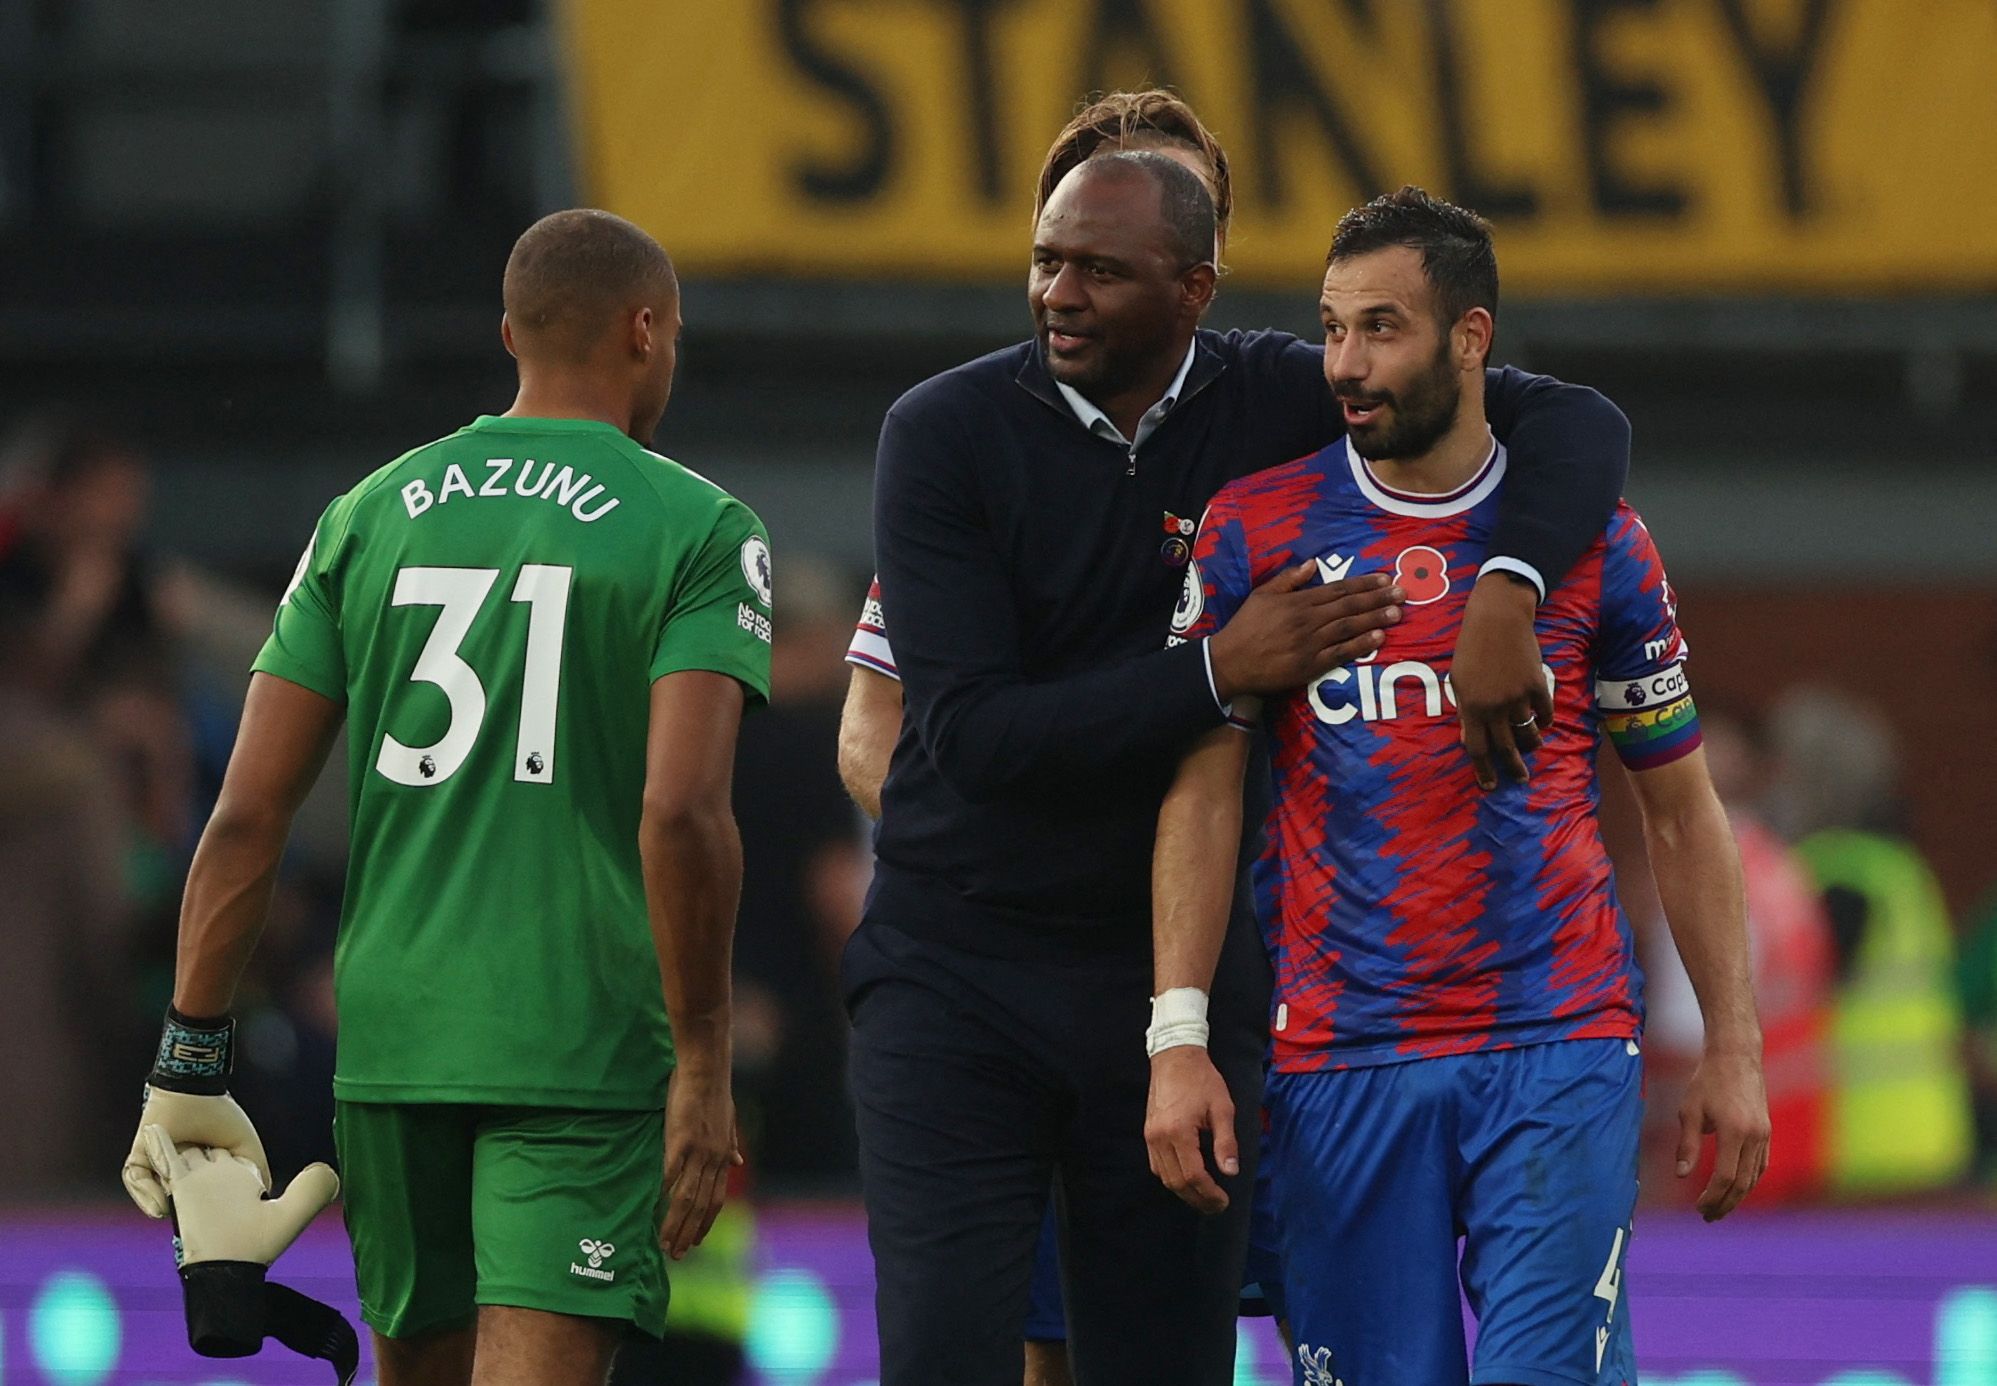 Soccer Football - Premier League - Crystal Palace v Southampton - Selhurst Park, London, Britain - October 29, 2022 Crystal Palace manager Patrick Vieira with Luka Milivojevic after the match Action Images via Reuters/Matthew Childs EDITORIAL USE ONLY. No use with unauthorized audio, video, data, fixture lists, club/league logos or 'live' services. Online in-match use limited to 75 images, no video emulation. No use in betting, games or single club /league/player publications.  Please contact yo